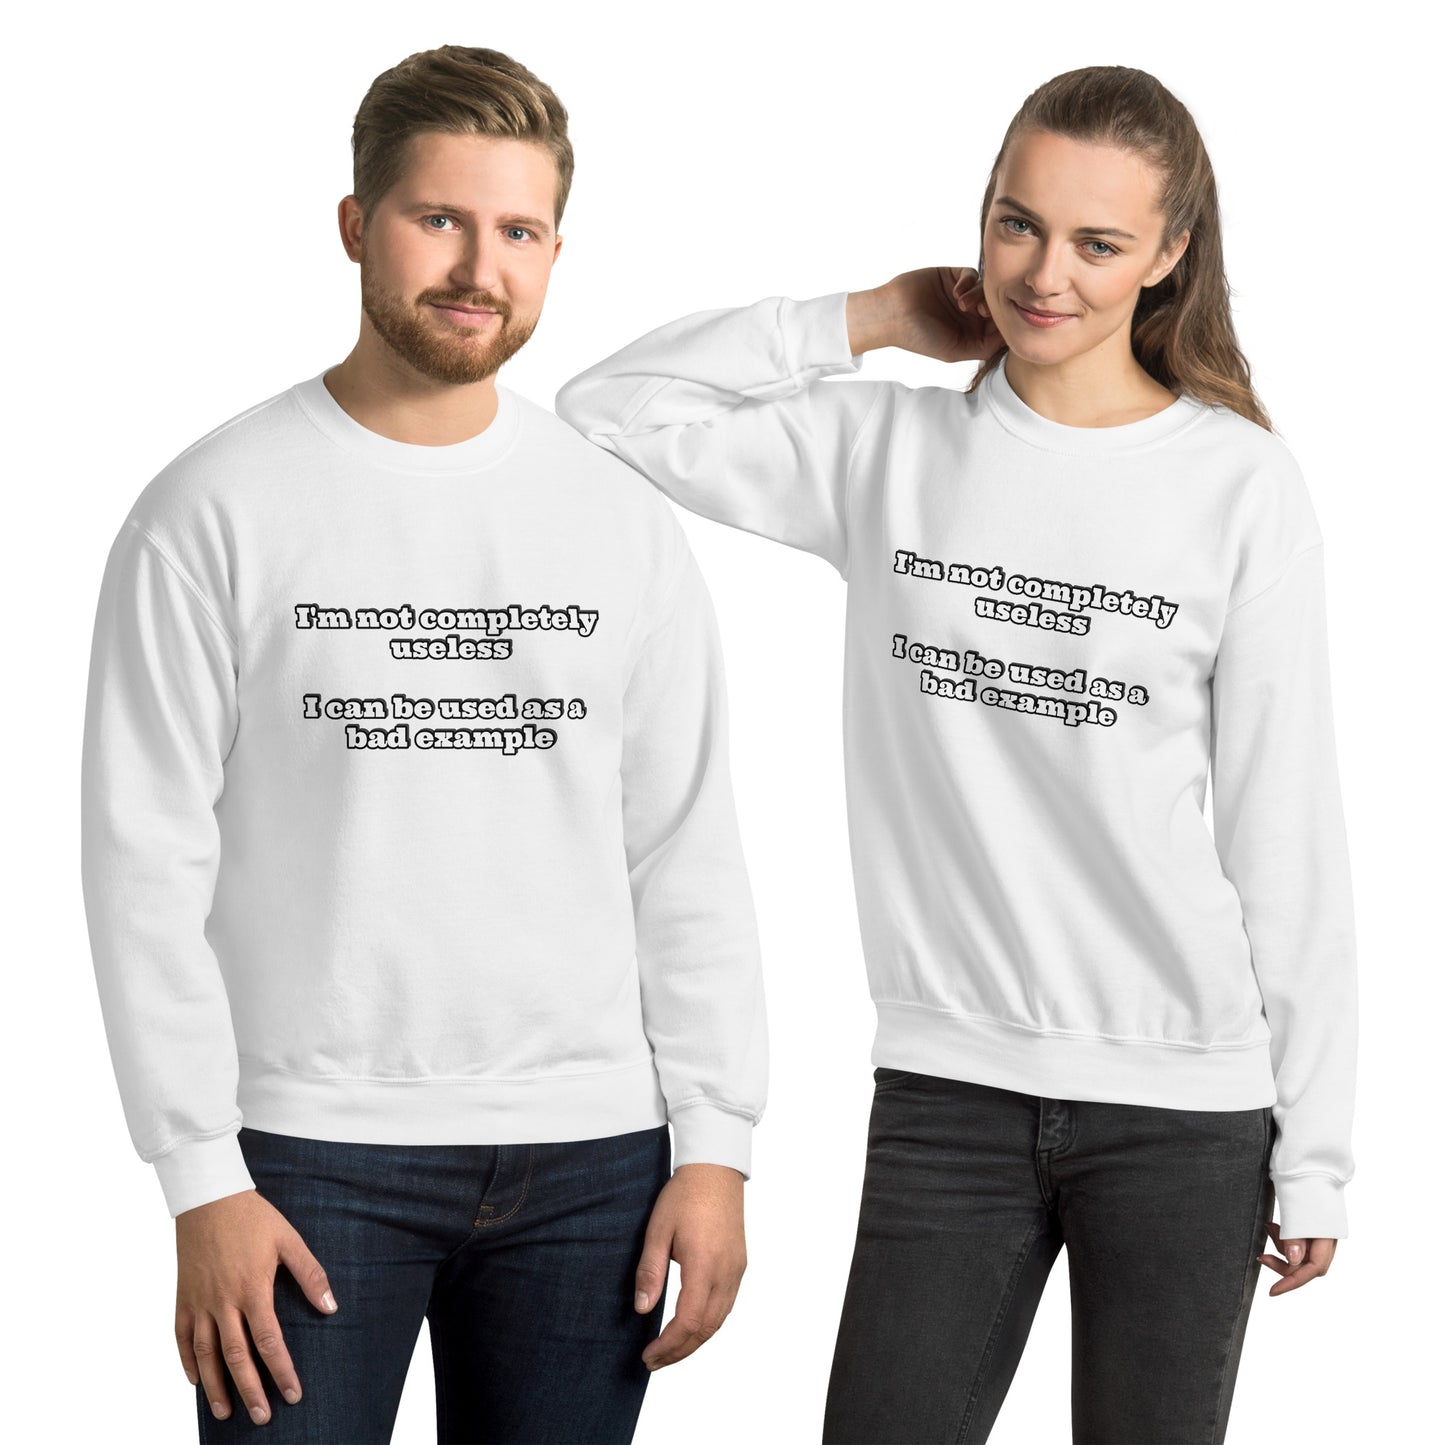 Man and women with white sweatshirt with text “I'm not completely useless I can be used as a bad example”